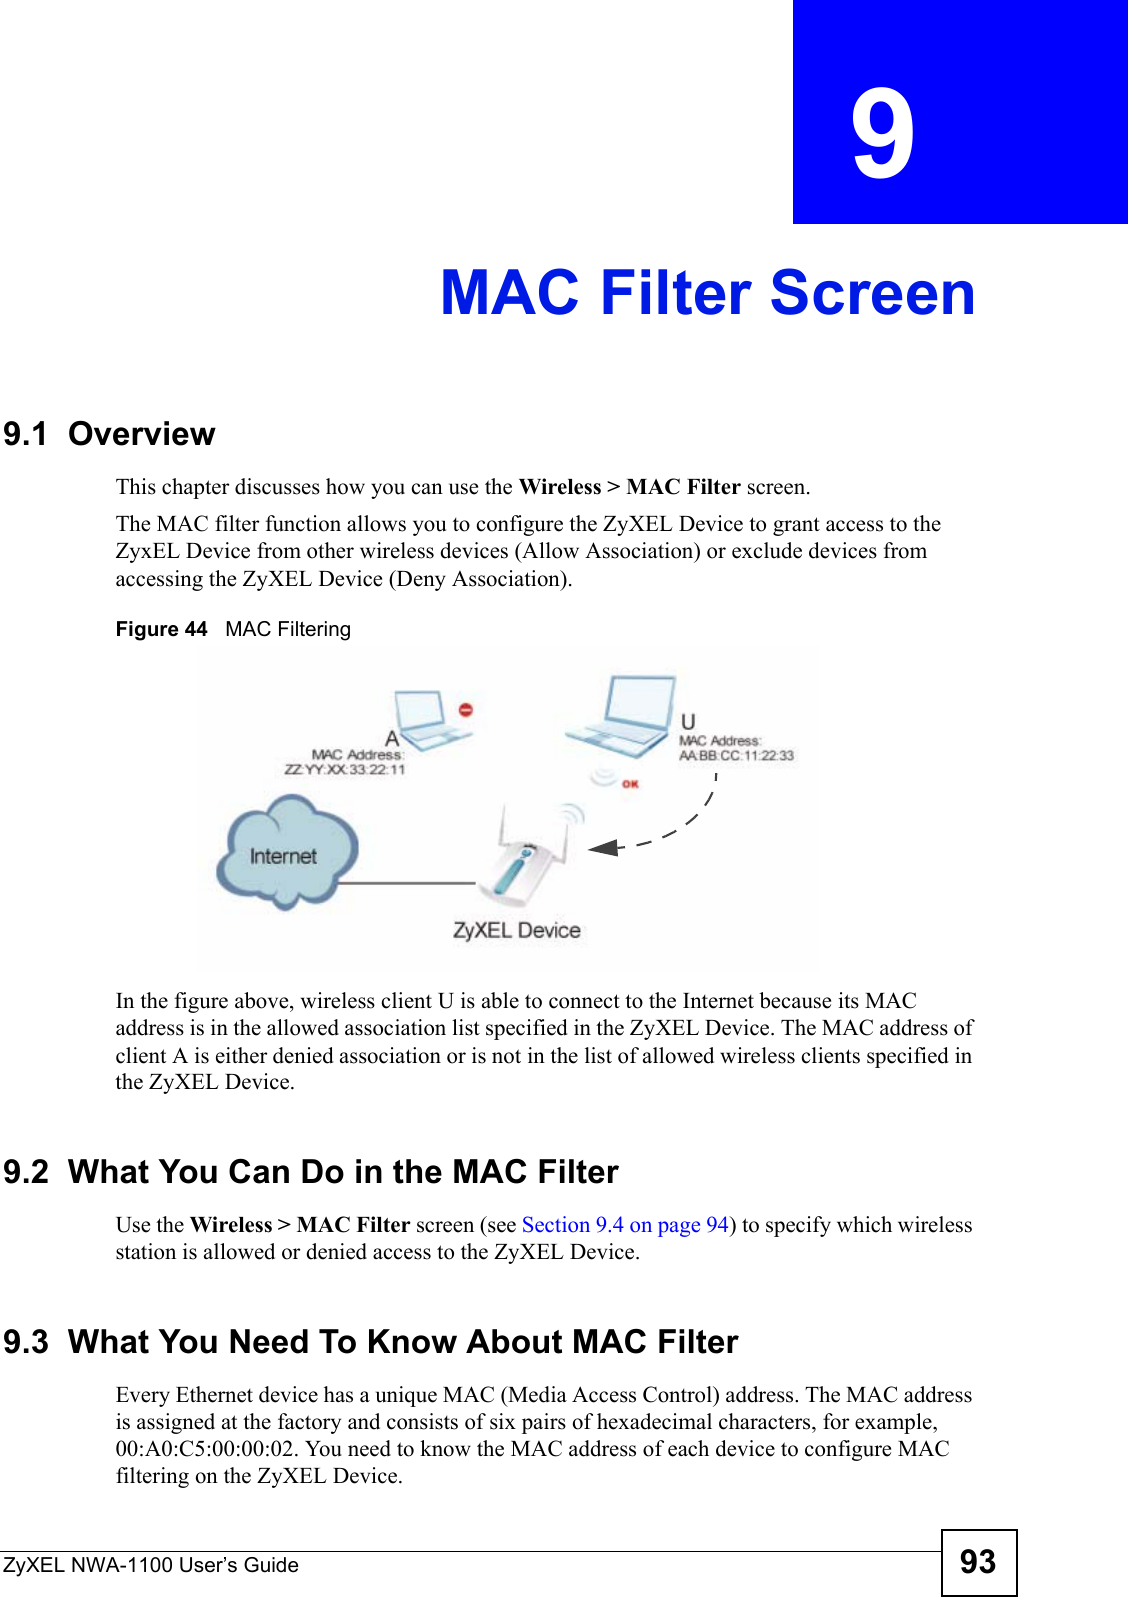 ZyXEL NWA-1100 User’s Guide 93CHAPTER  9 MAC Filter Screen9.1  OverviewThis chapter discusses how you can use the Wireless &gt; MAC Filter screen.The MAC filter function allows you to configure the ZyXEL Device to grant access to the ZyxEL Device from other wireless devices (Allow Association) or exclude devices from accessing the ZyXEL Device (Deny Association). Figure 44   MAC Filtering In the figure above, wireless client U is able to connect to the Internet because its MAC address is in the allowed association list specified in the ZyXEL Device. The MAC address of client A is either denied association or is not in the list of allowed wireless clients specified in the ZyXEL Device.9.2  What You Can Do in the MAC Filter Use the Wireless &gt; MAC Filter screen (see Section 9.4 on page 94) to specify which wireless station is allowed or denied access to the ZyXEL Device.9.3  What You Need To Know About MAC FilterEvery Ethernet device has a unique MAC (Media Access Control) address. The MAC address is assigned at the factory and consists of six pairs of hexadecimal characters, for example, 00:A0:C5:00:00:02. You need to know the MAC address of each device to configure MAC filtering on the ZyXEL Device.